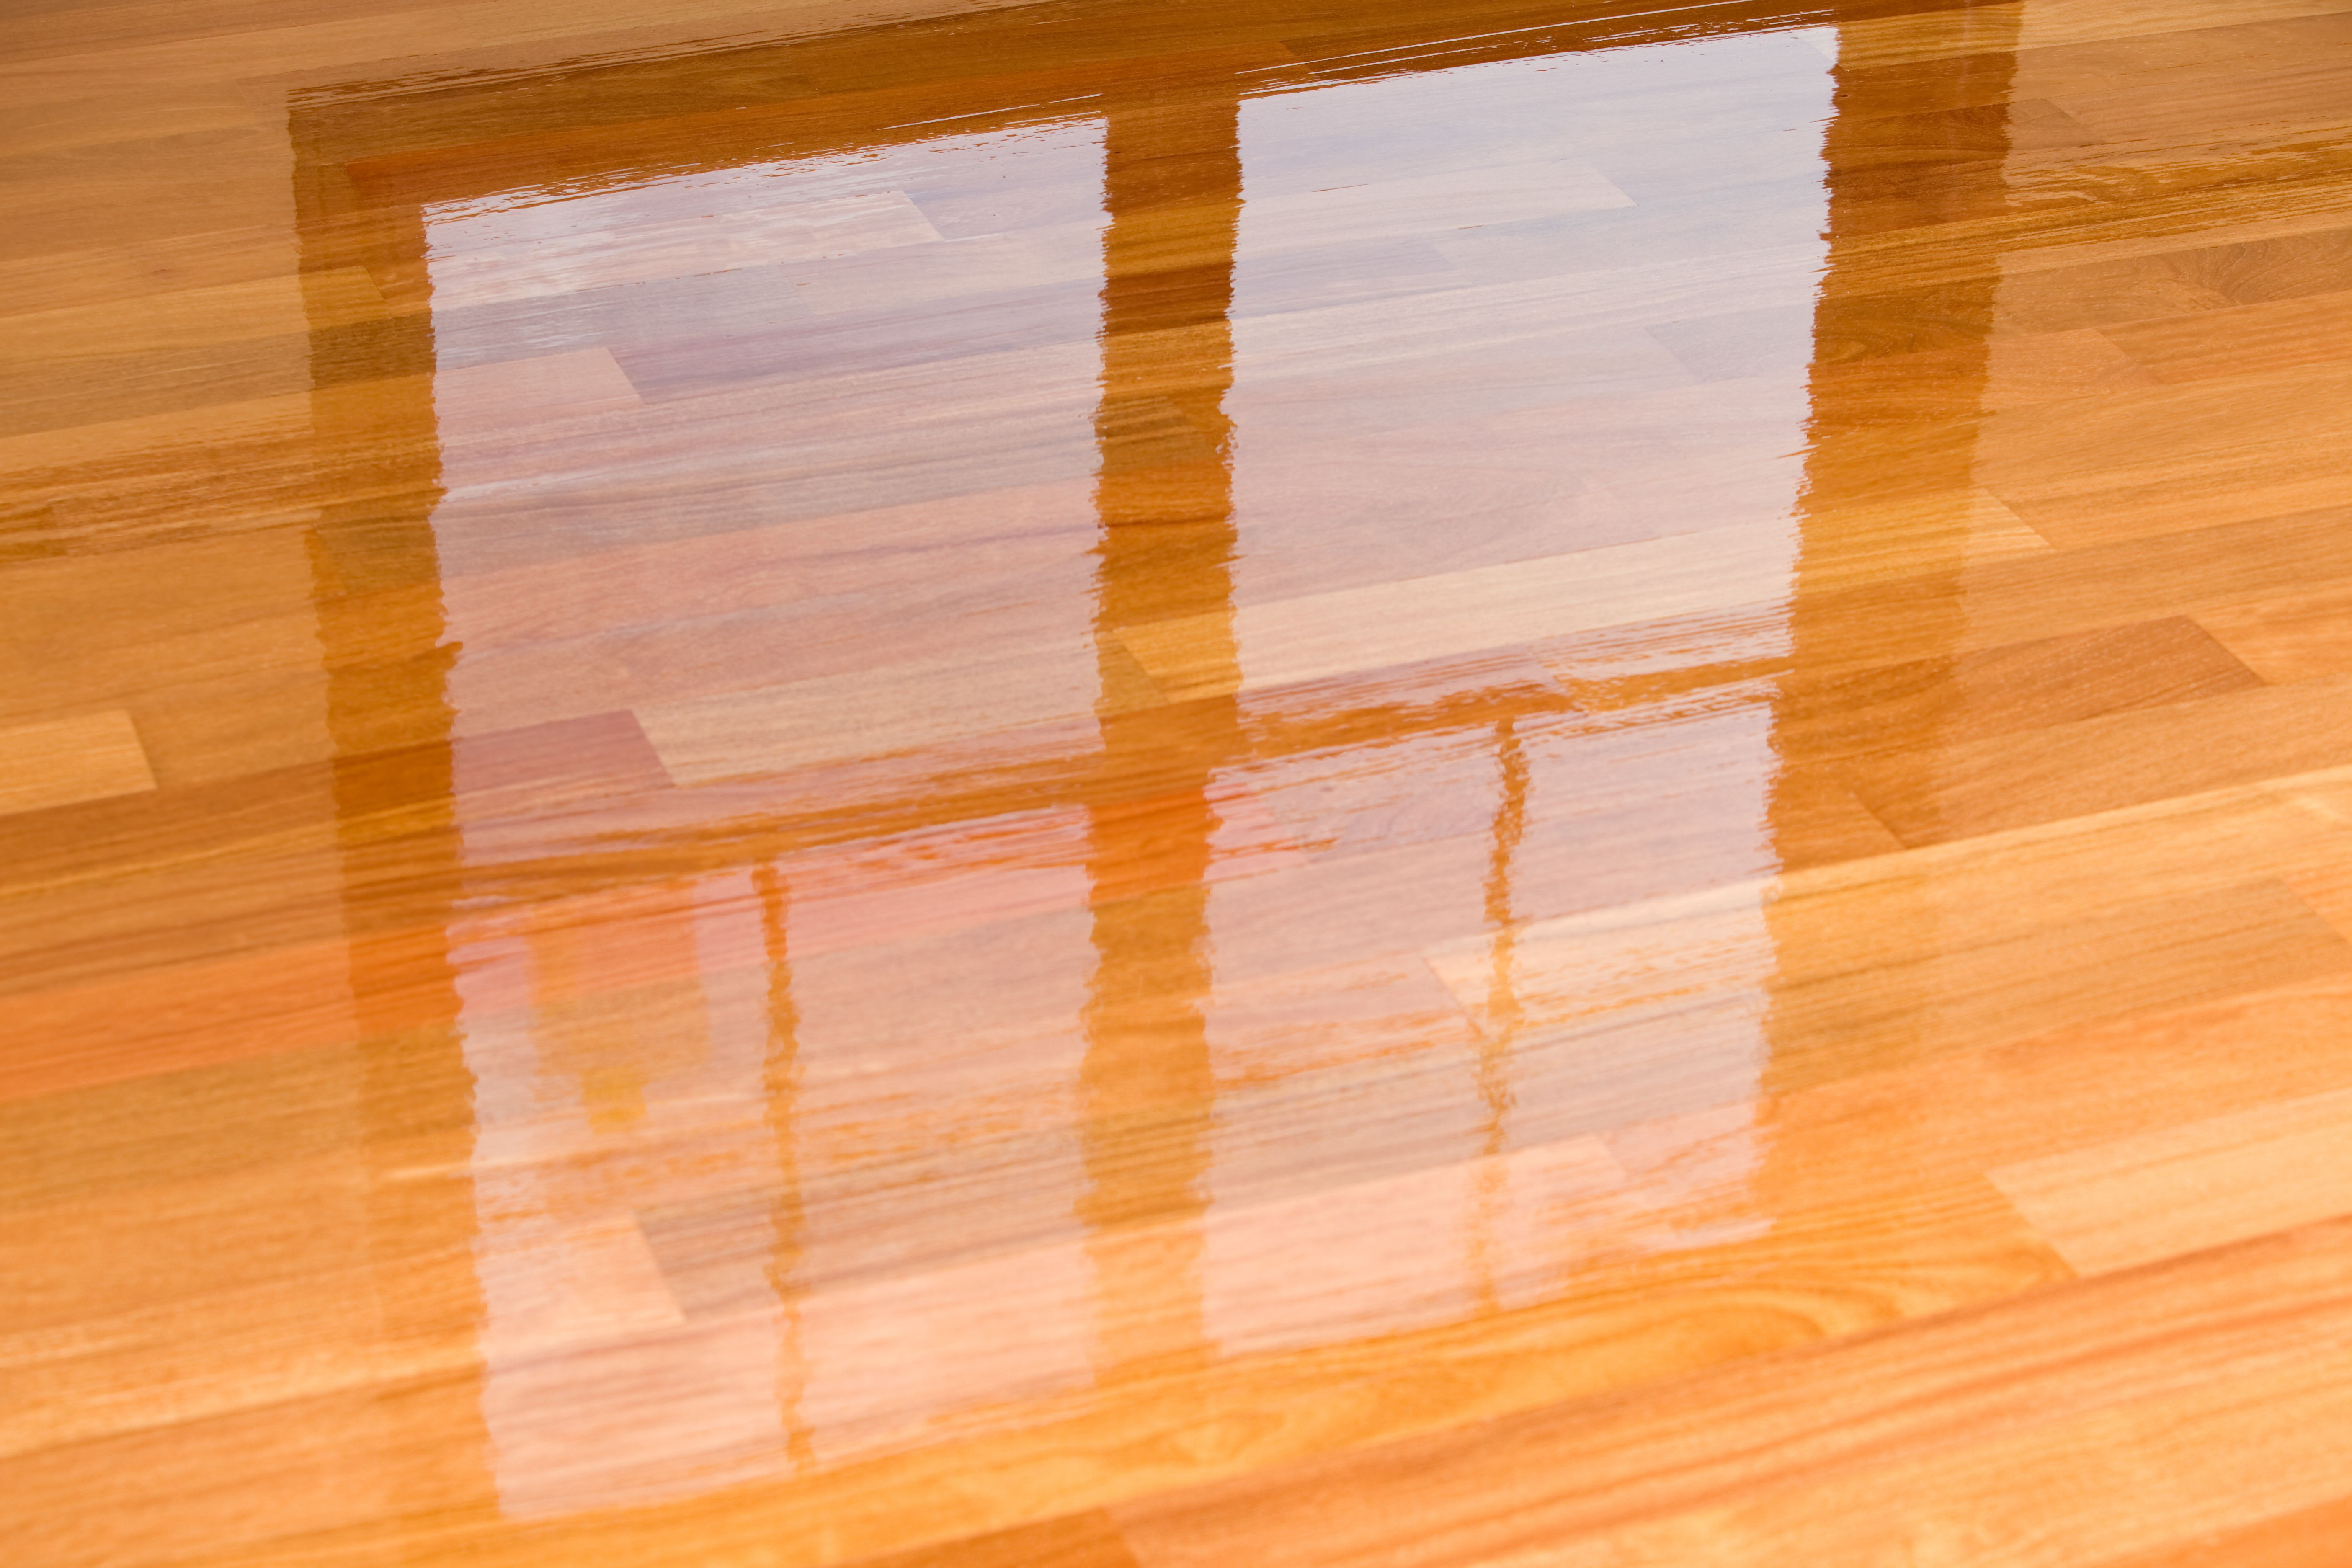 Canadian Made Hardwood Flooring Of Guide to Laminate Flooring Water and Damage Repair Regarding Wet Polyurethane On New Hardwood Floor with Window Reflection 183846705 582e34da3df78c6f6a403968